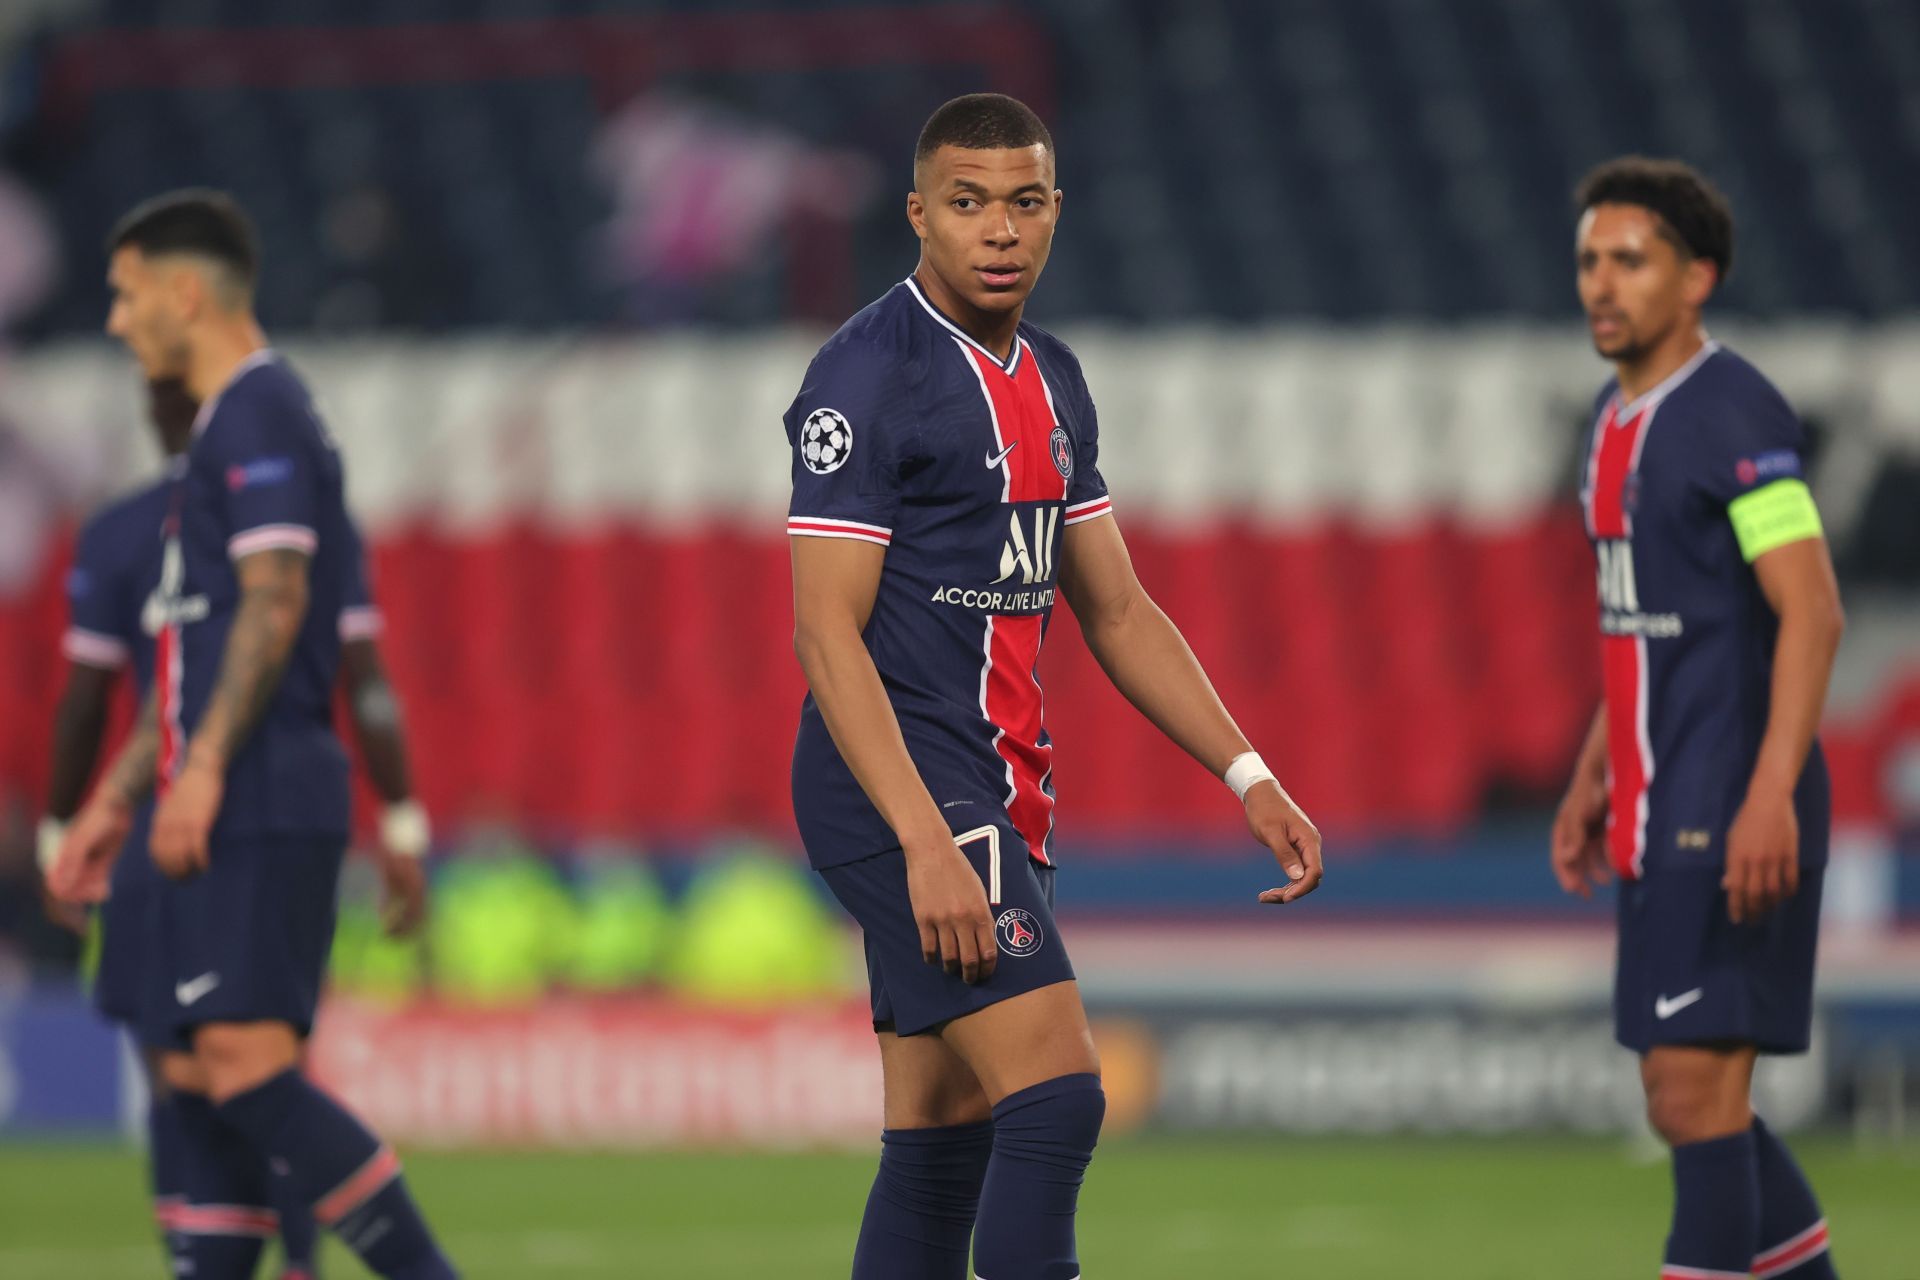 PSG take on RB Leipzig in the UEFA Champions League this week